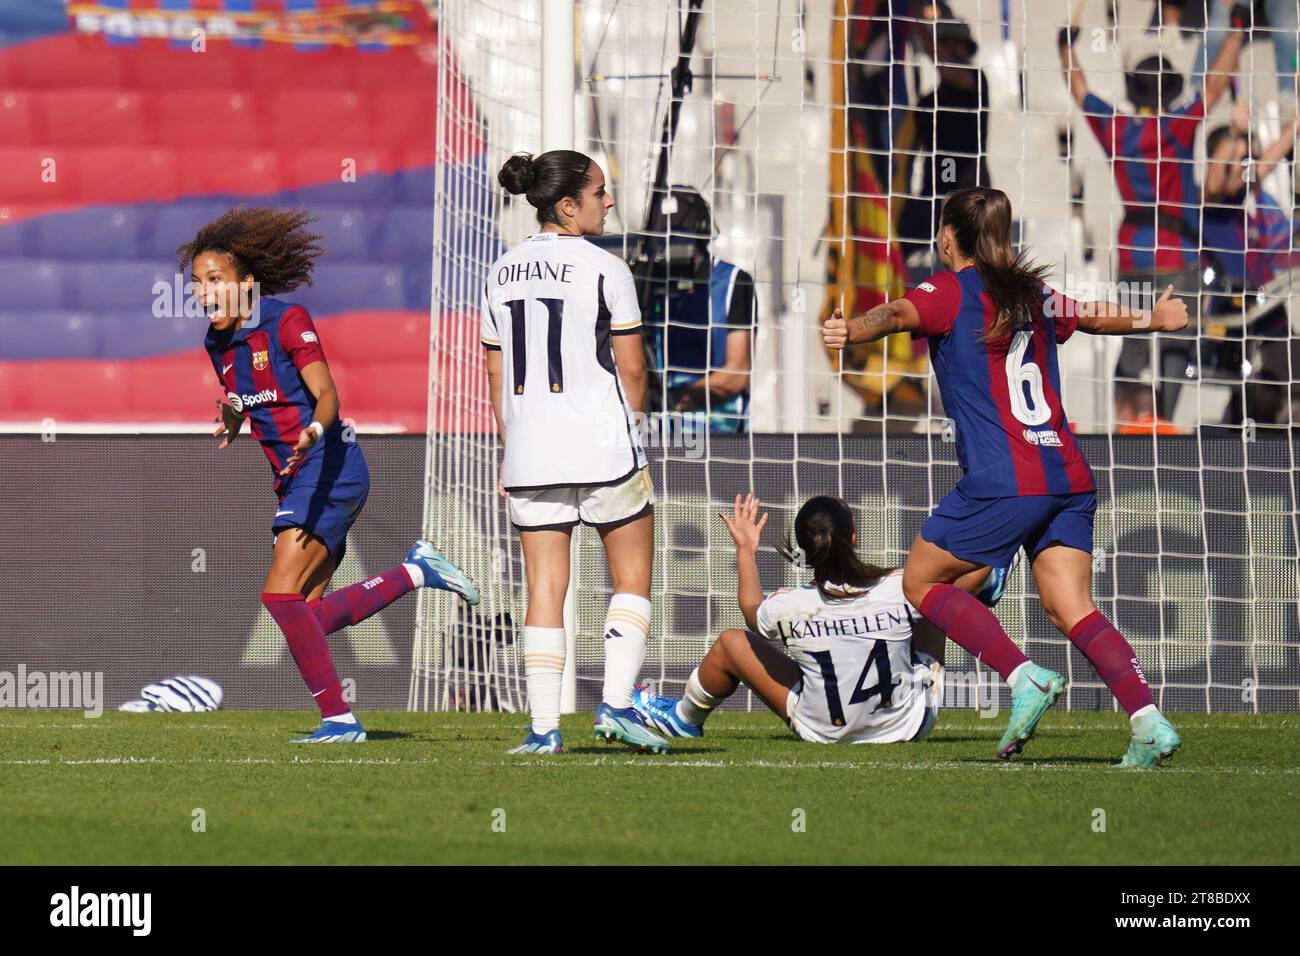 Barcelona, Spain. 19th Nov, 2023. Vicky Lopez of FC Barcelona celebrates after scoring goal during the Liga F match between FC Barcelona and Real Madrid played at Luis Companys Stadium on November 19, 2023 in Barcelona, Spain. (Photo by Carla Pazos/PRESSINPHOTO) Credit: PRESSINPHOTO SPORTS AGENCY/Alamy Live News Stock Photo